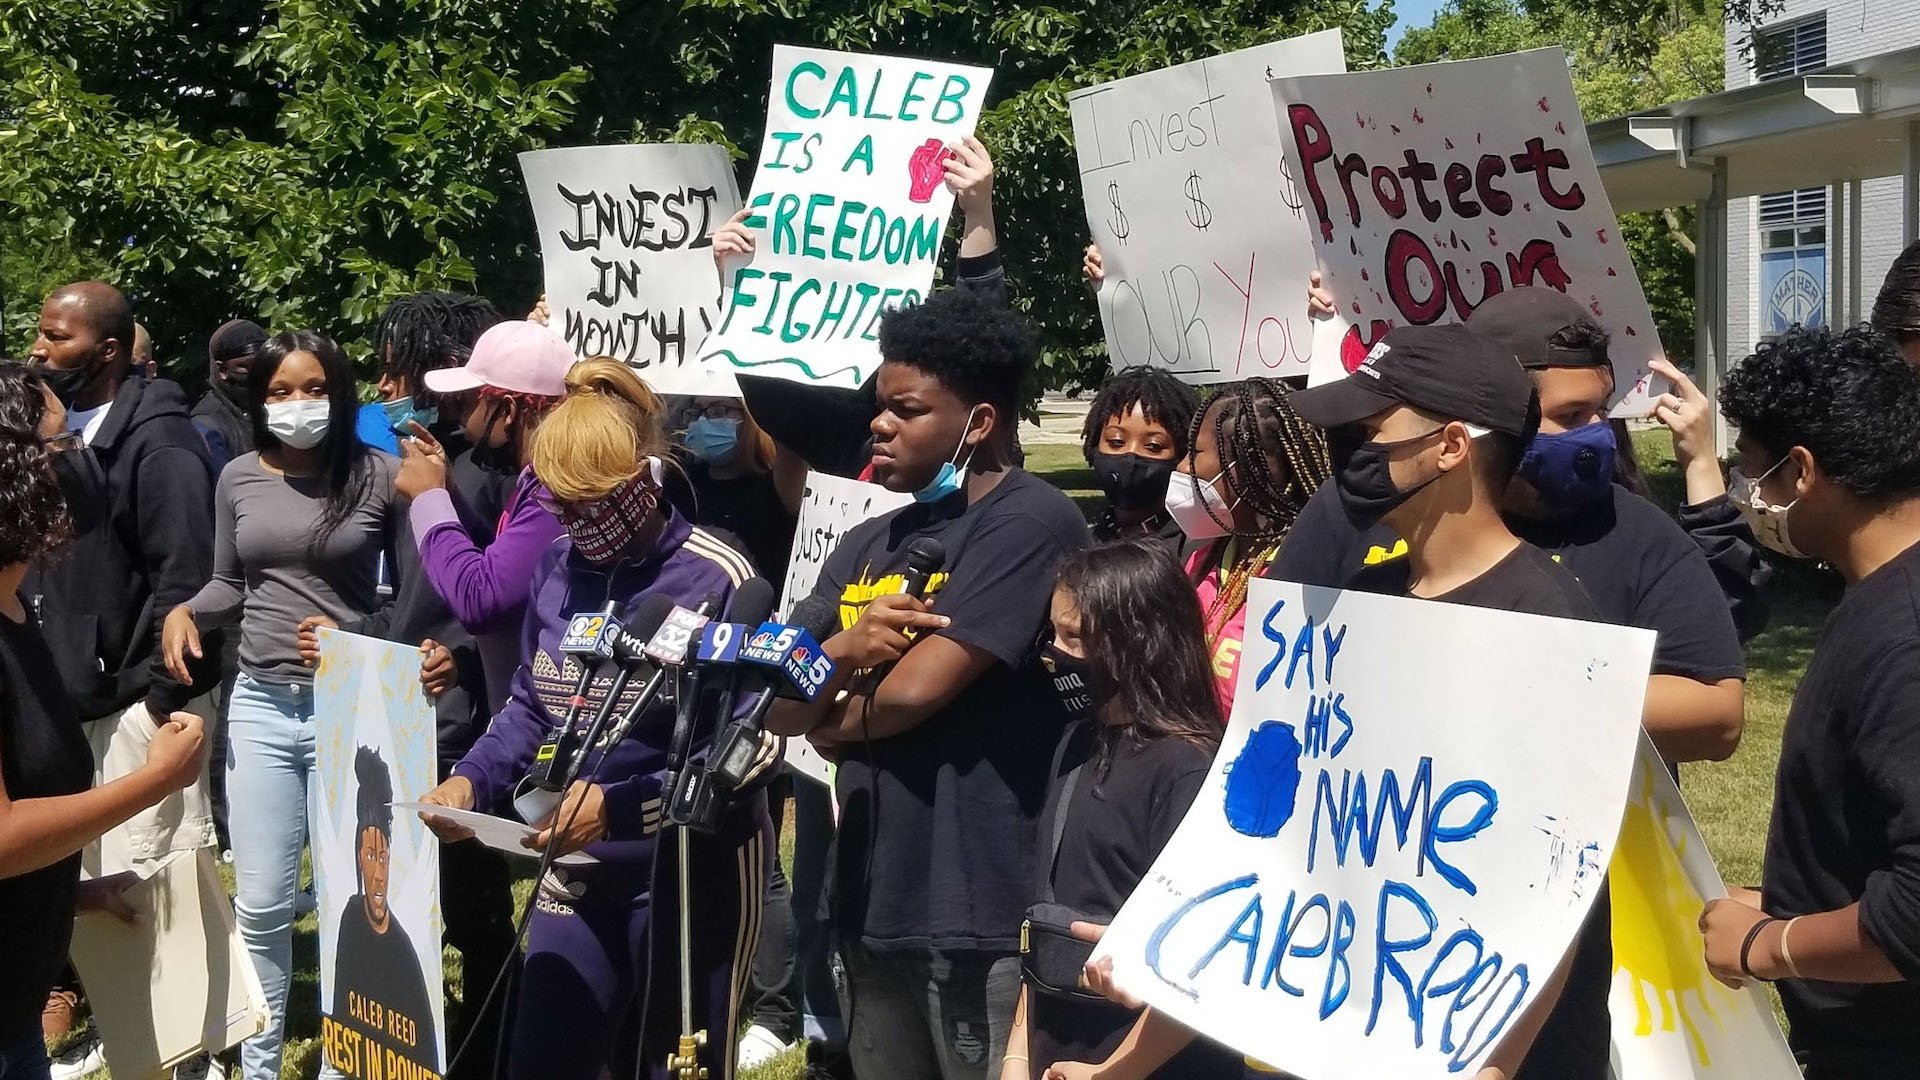 Family and friends of teen activist Caleb Reed gather outside Mather High School Tuesday, Aug. 4, 2020. Reed, 17, died Sunday after he was shot days earlier. (Matt Masterson / WTTW News)